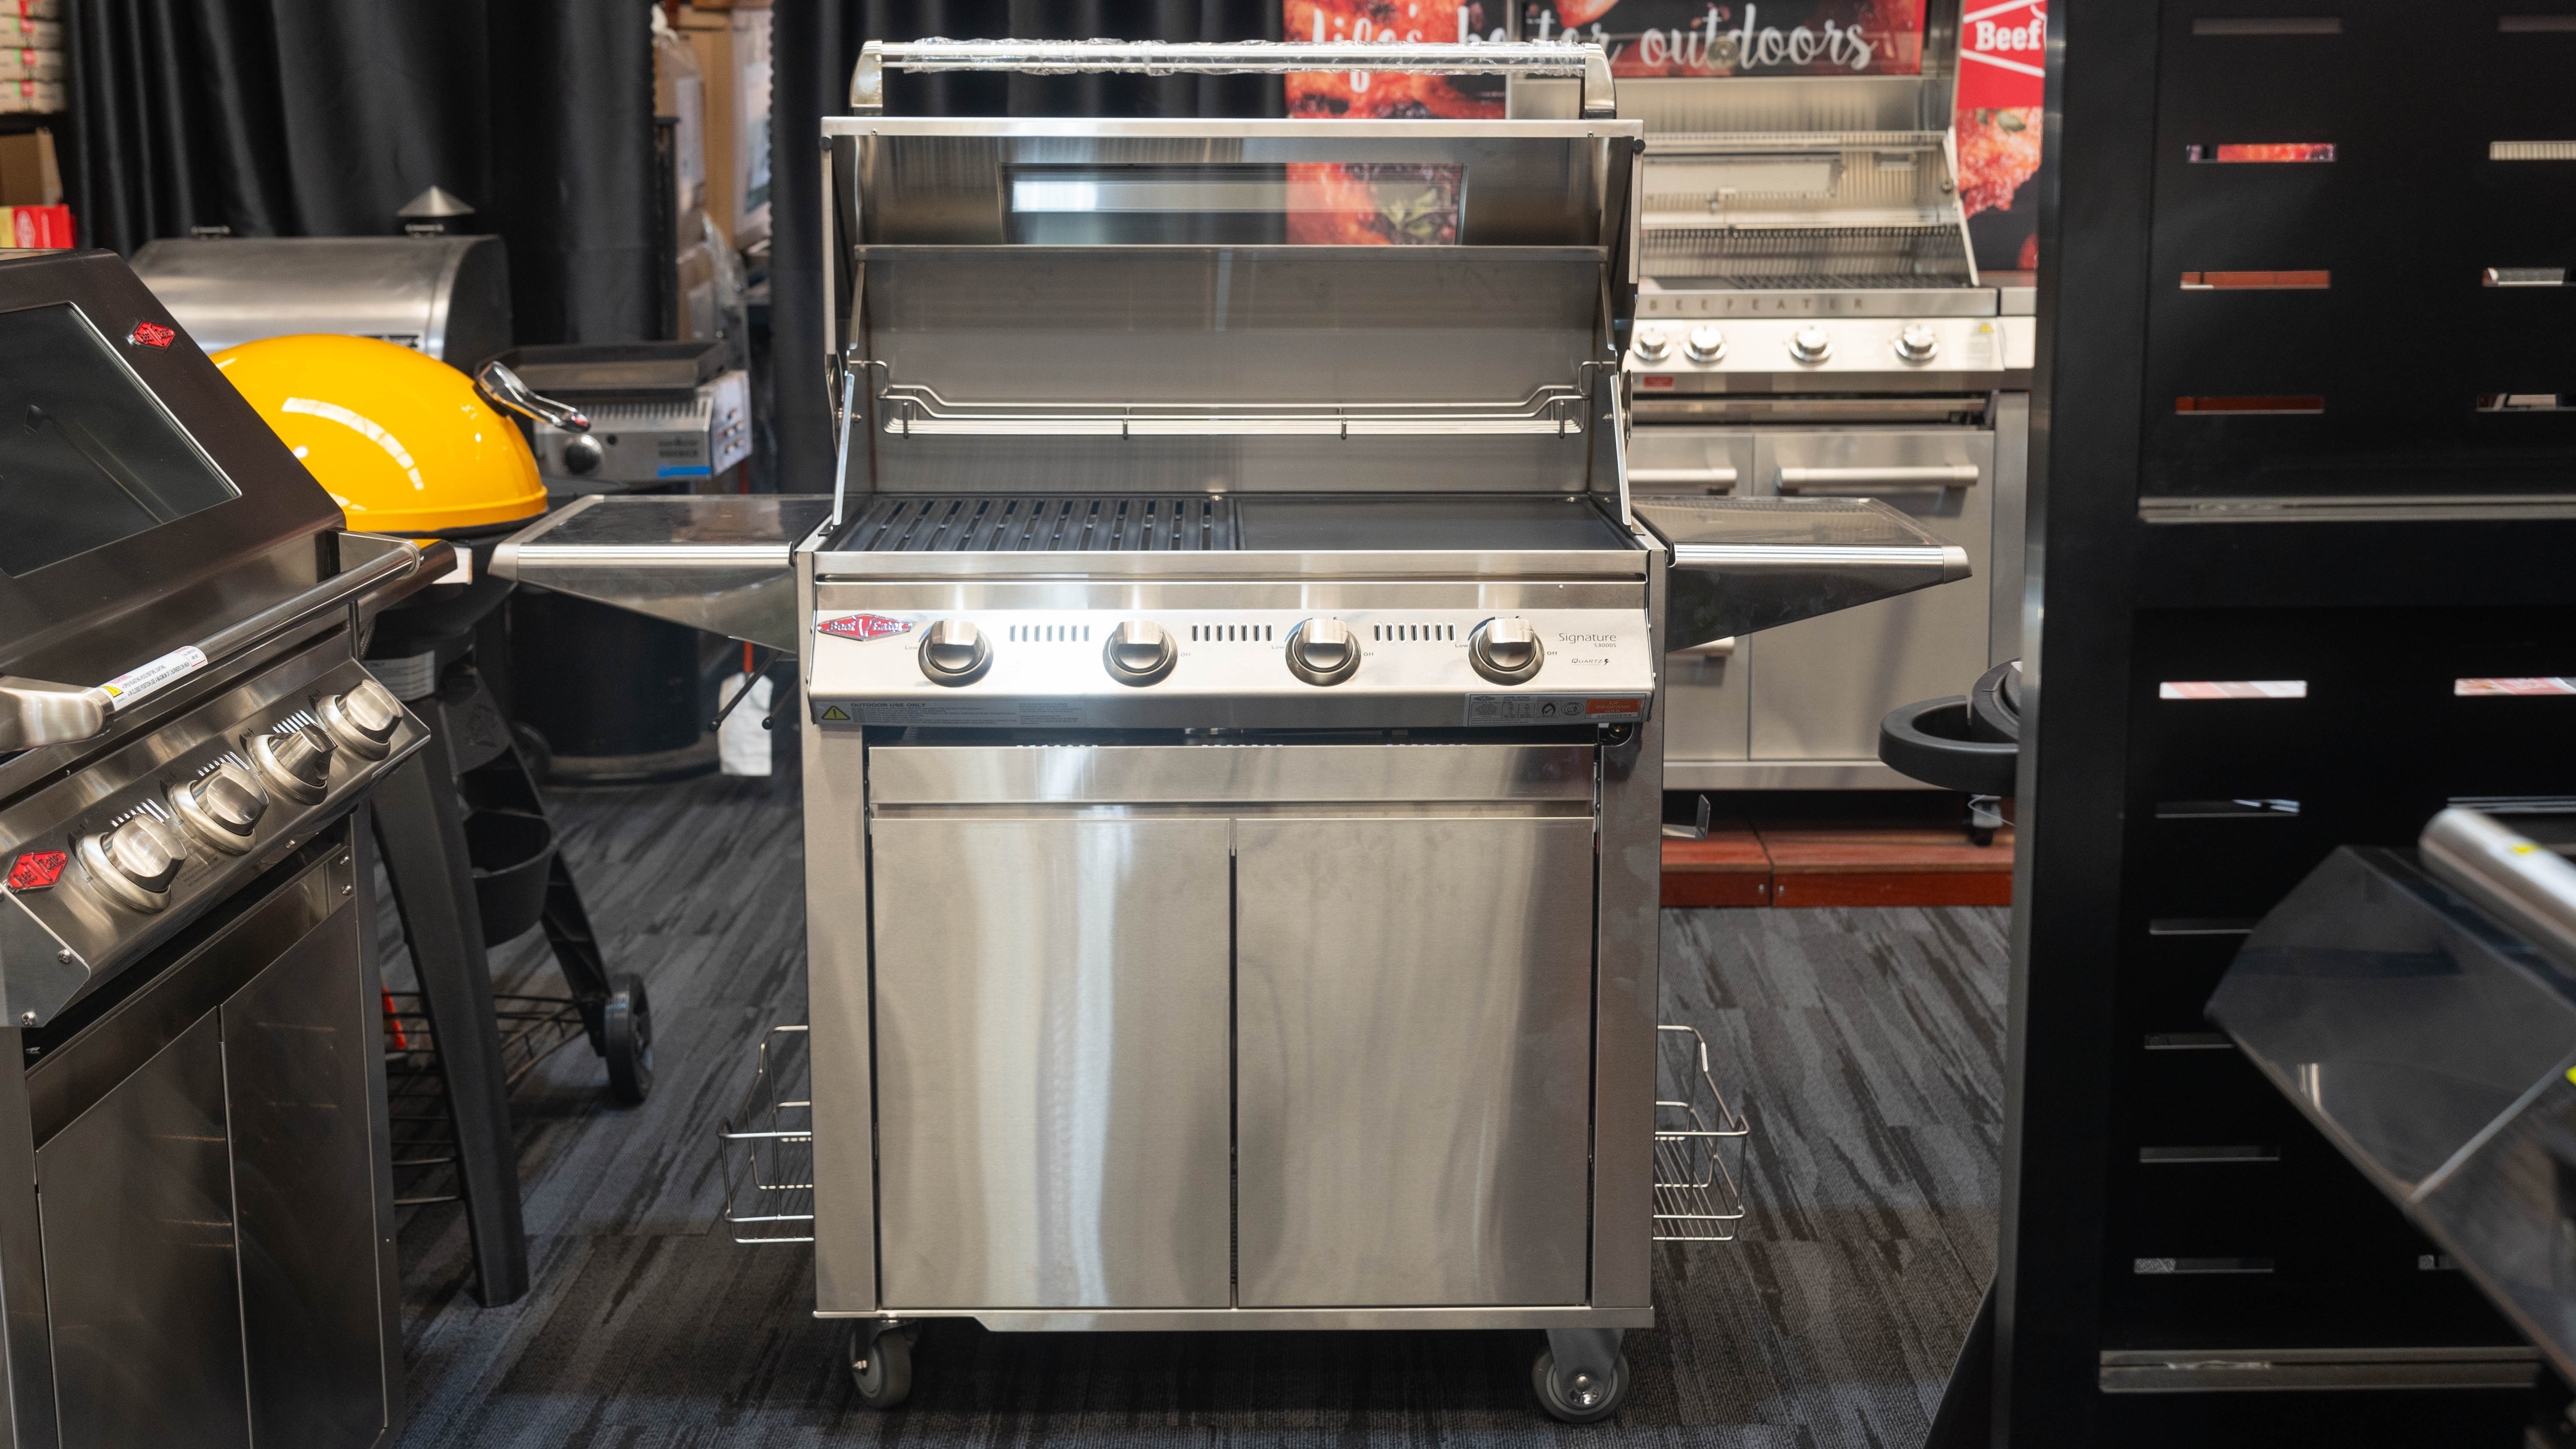 Clearance - Beefeater 7000 4 Burner Stainless Steel BBQ On Trolley